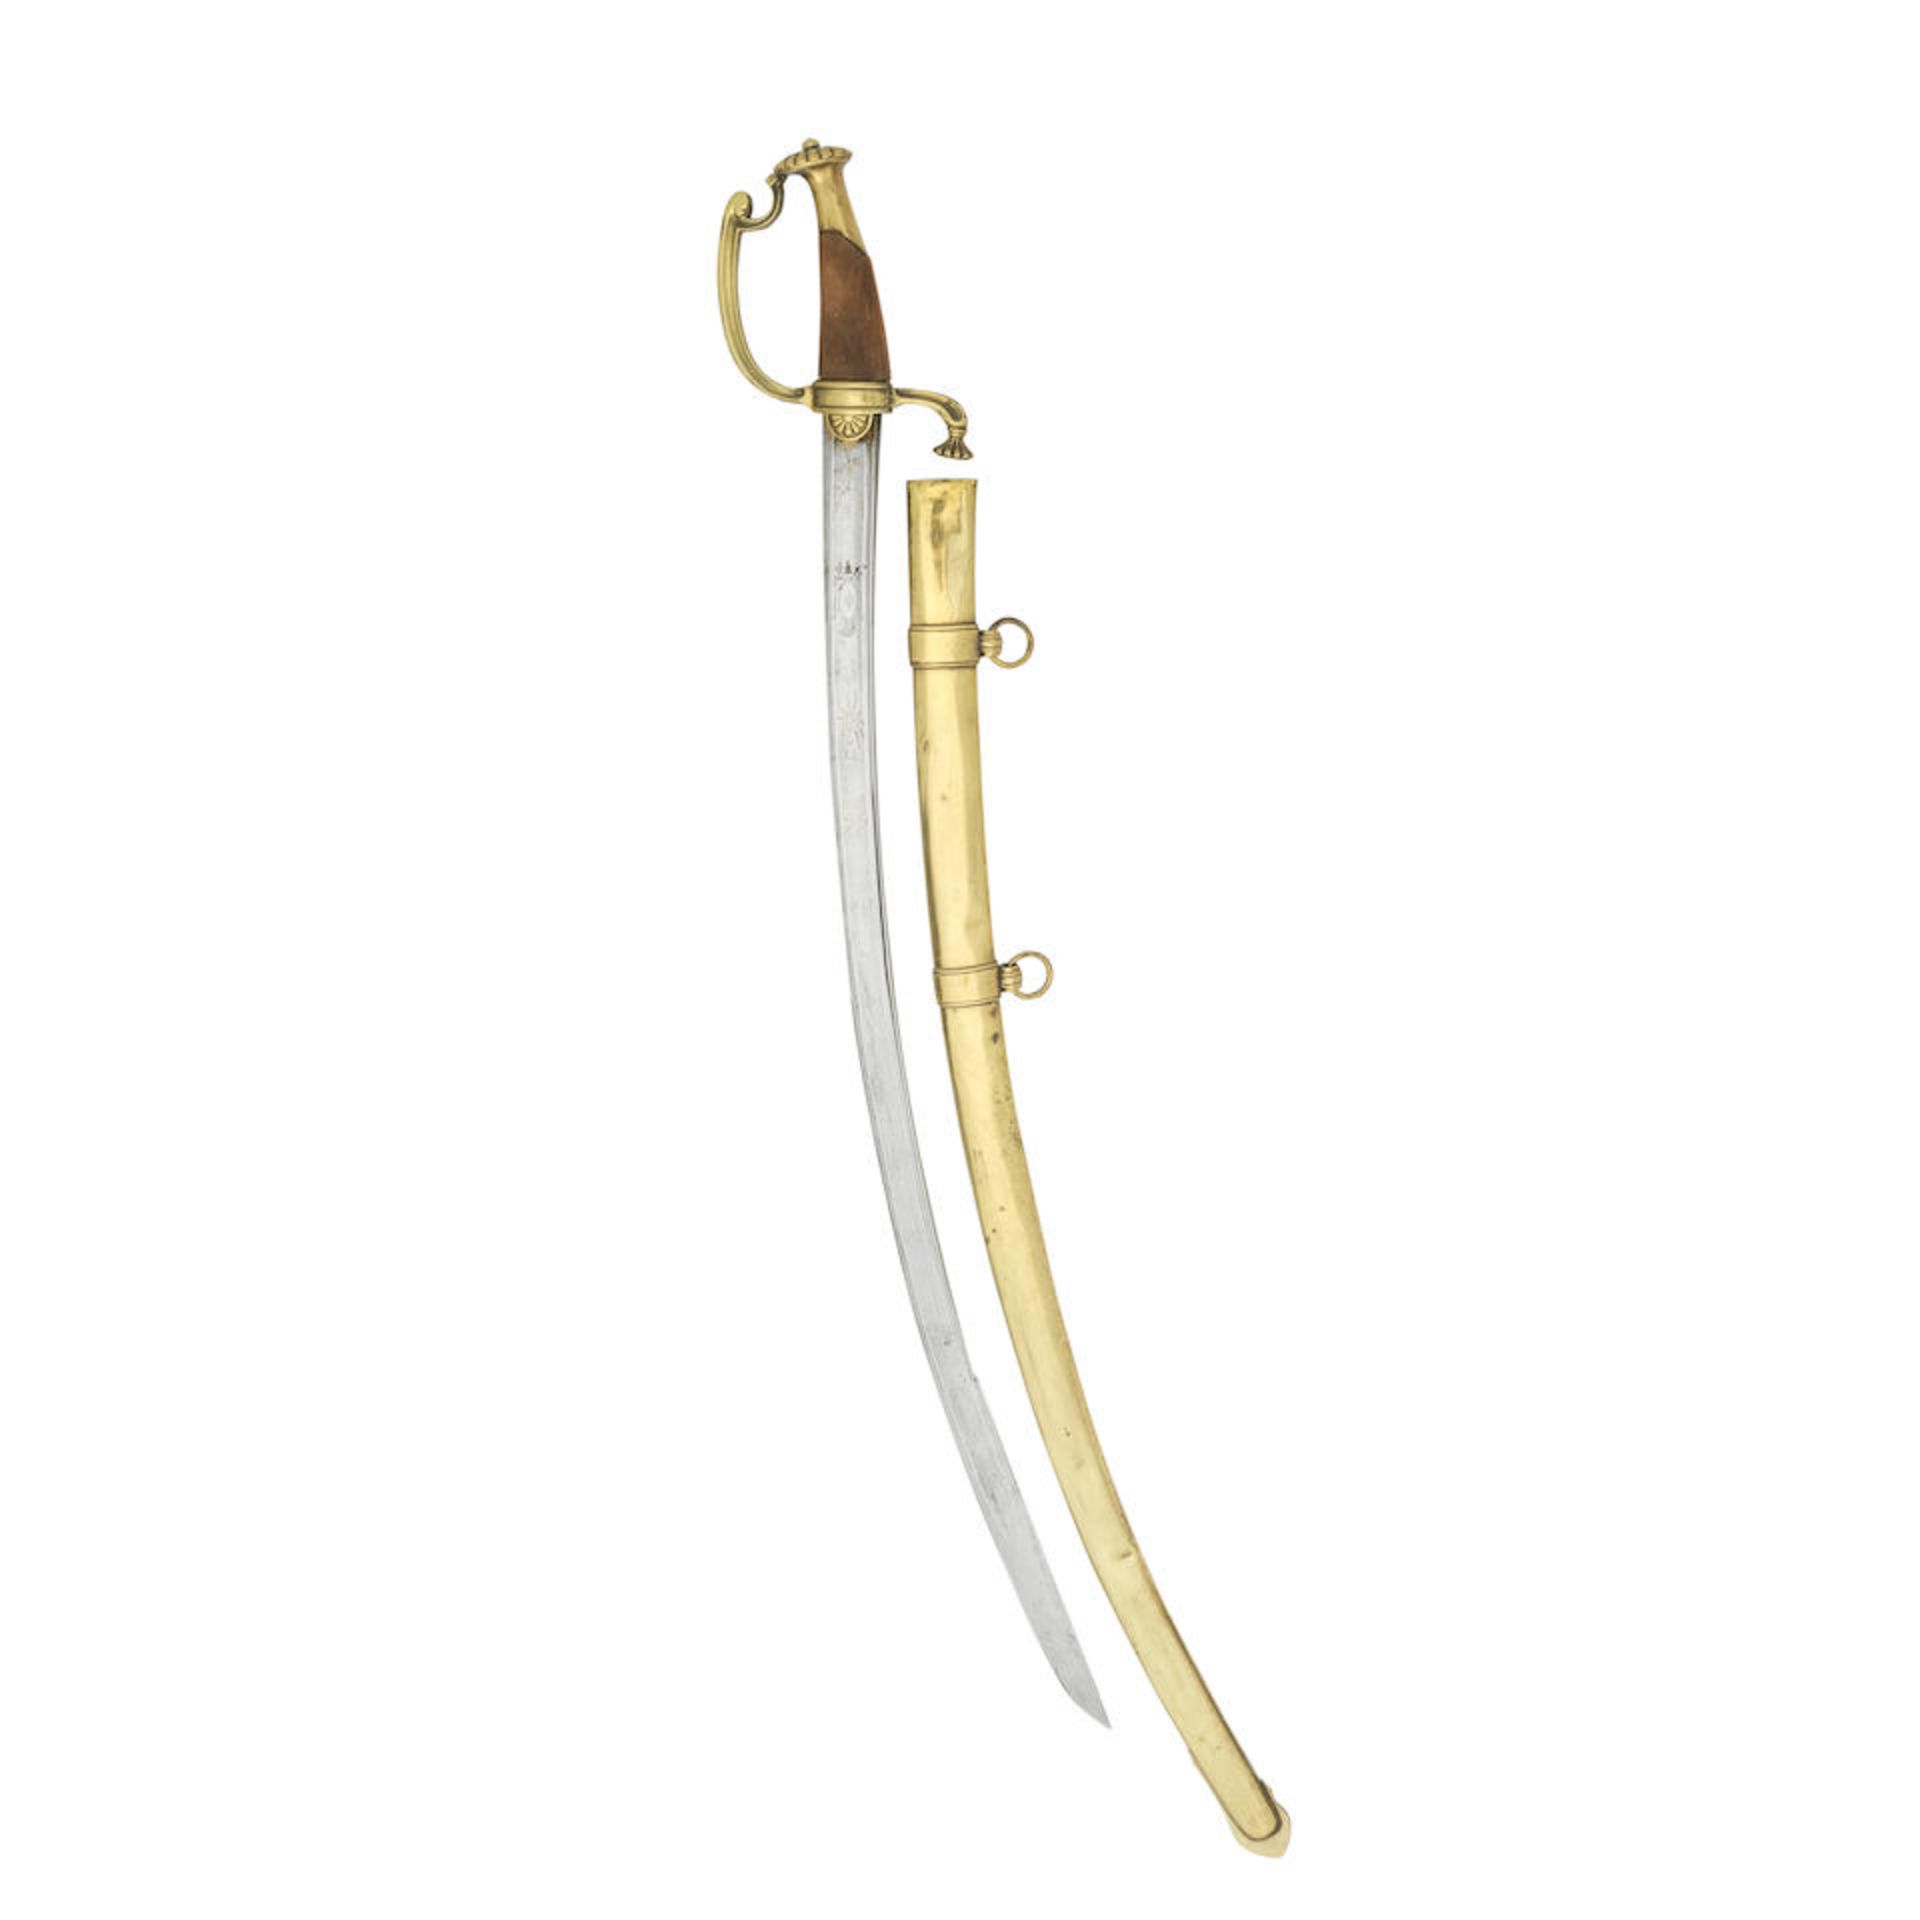 A Napoleonic Infantry Officer's Sabre